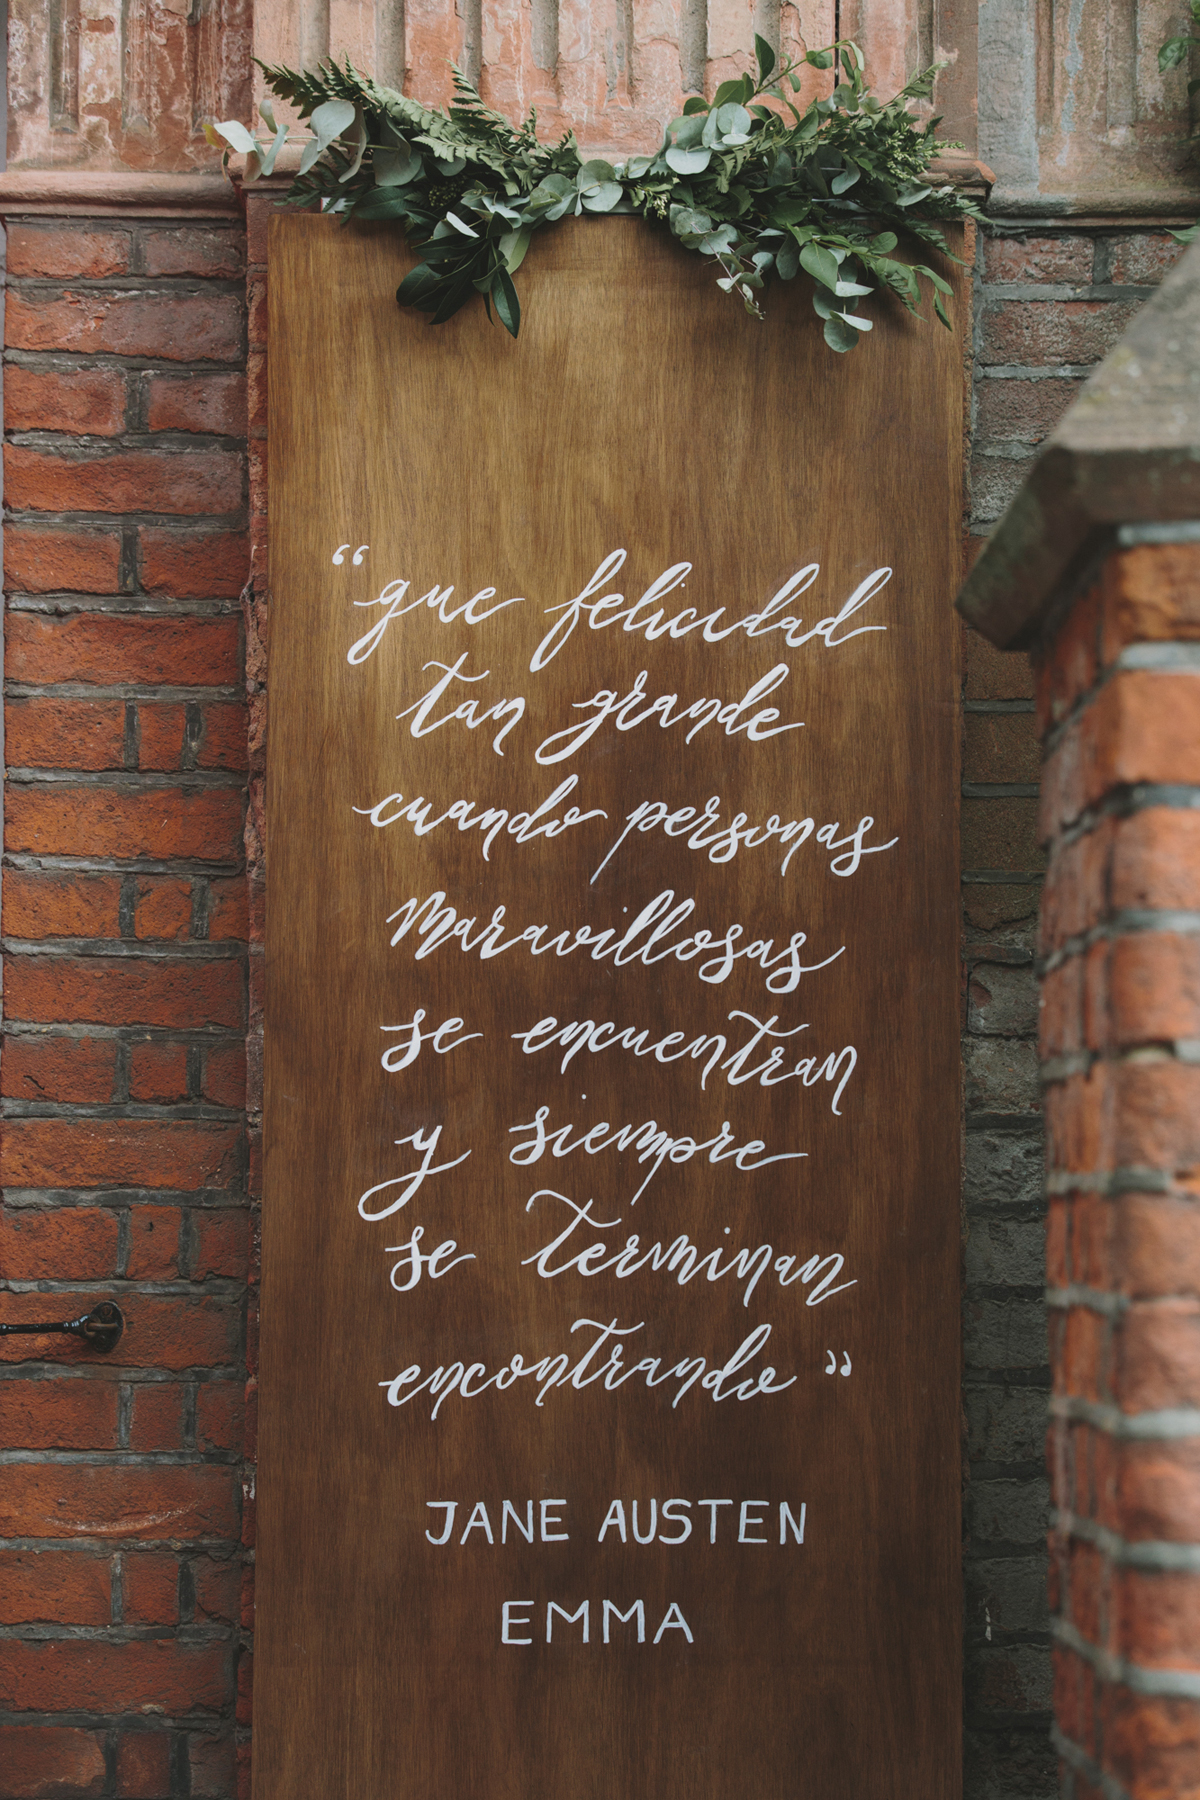 25 A Jane Austen Emma quote written in white on a recycled piece of wood for wedding signate images by McKinley Rodgers